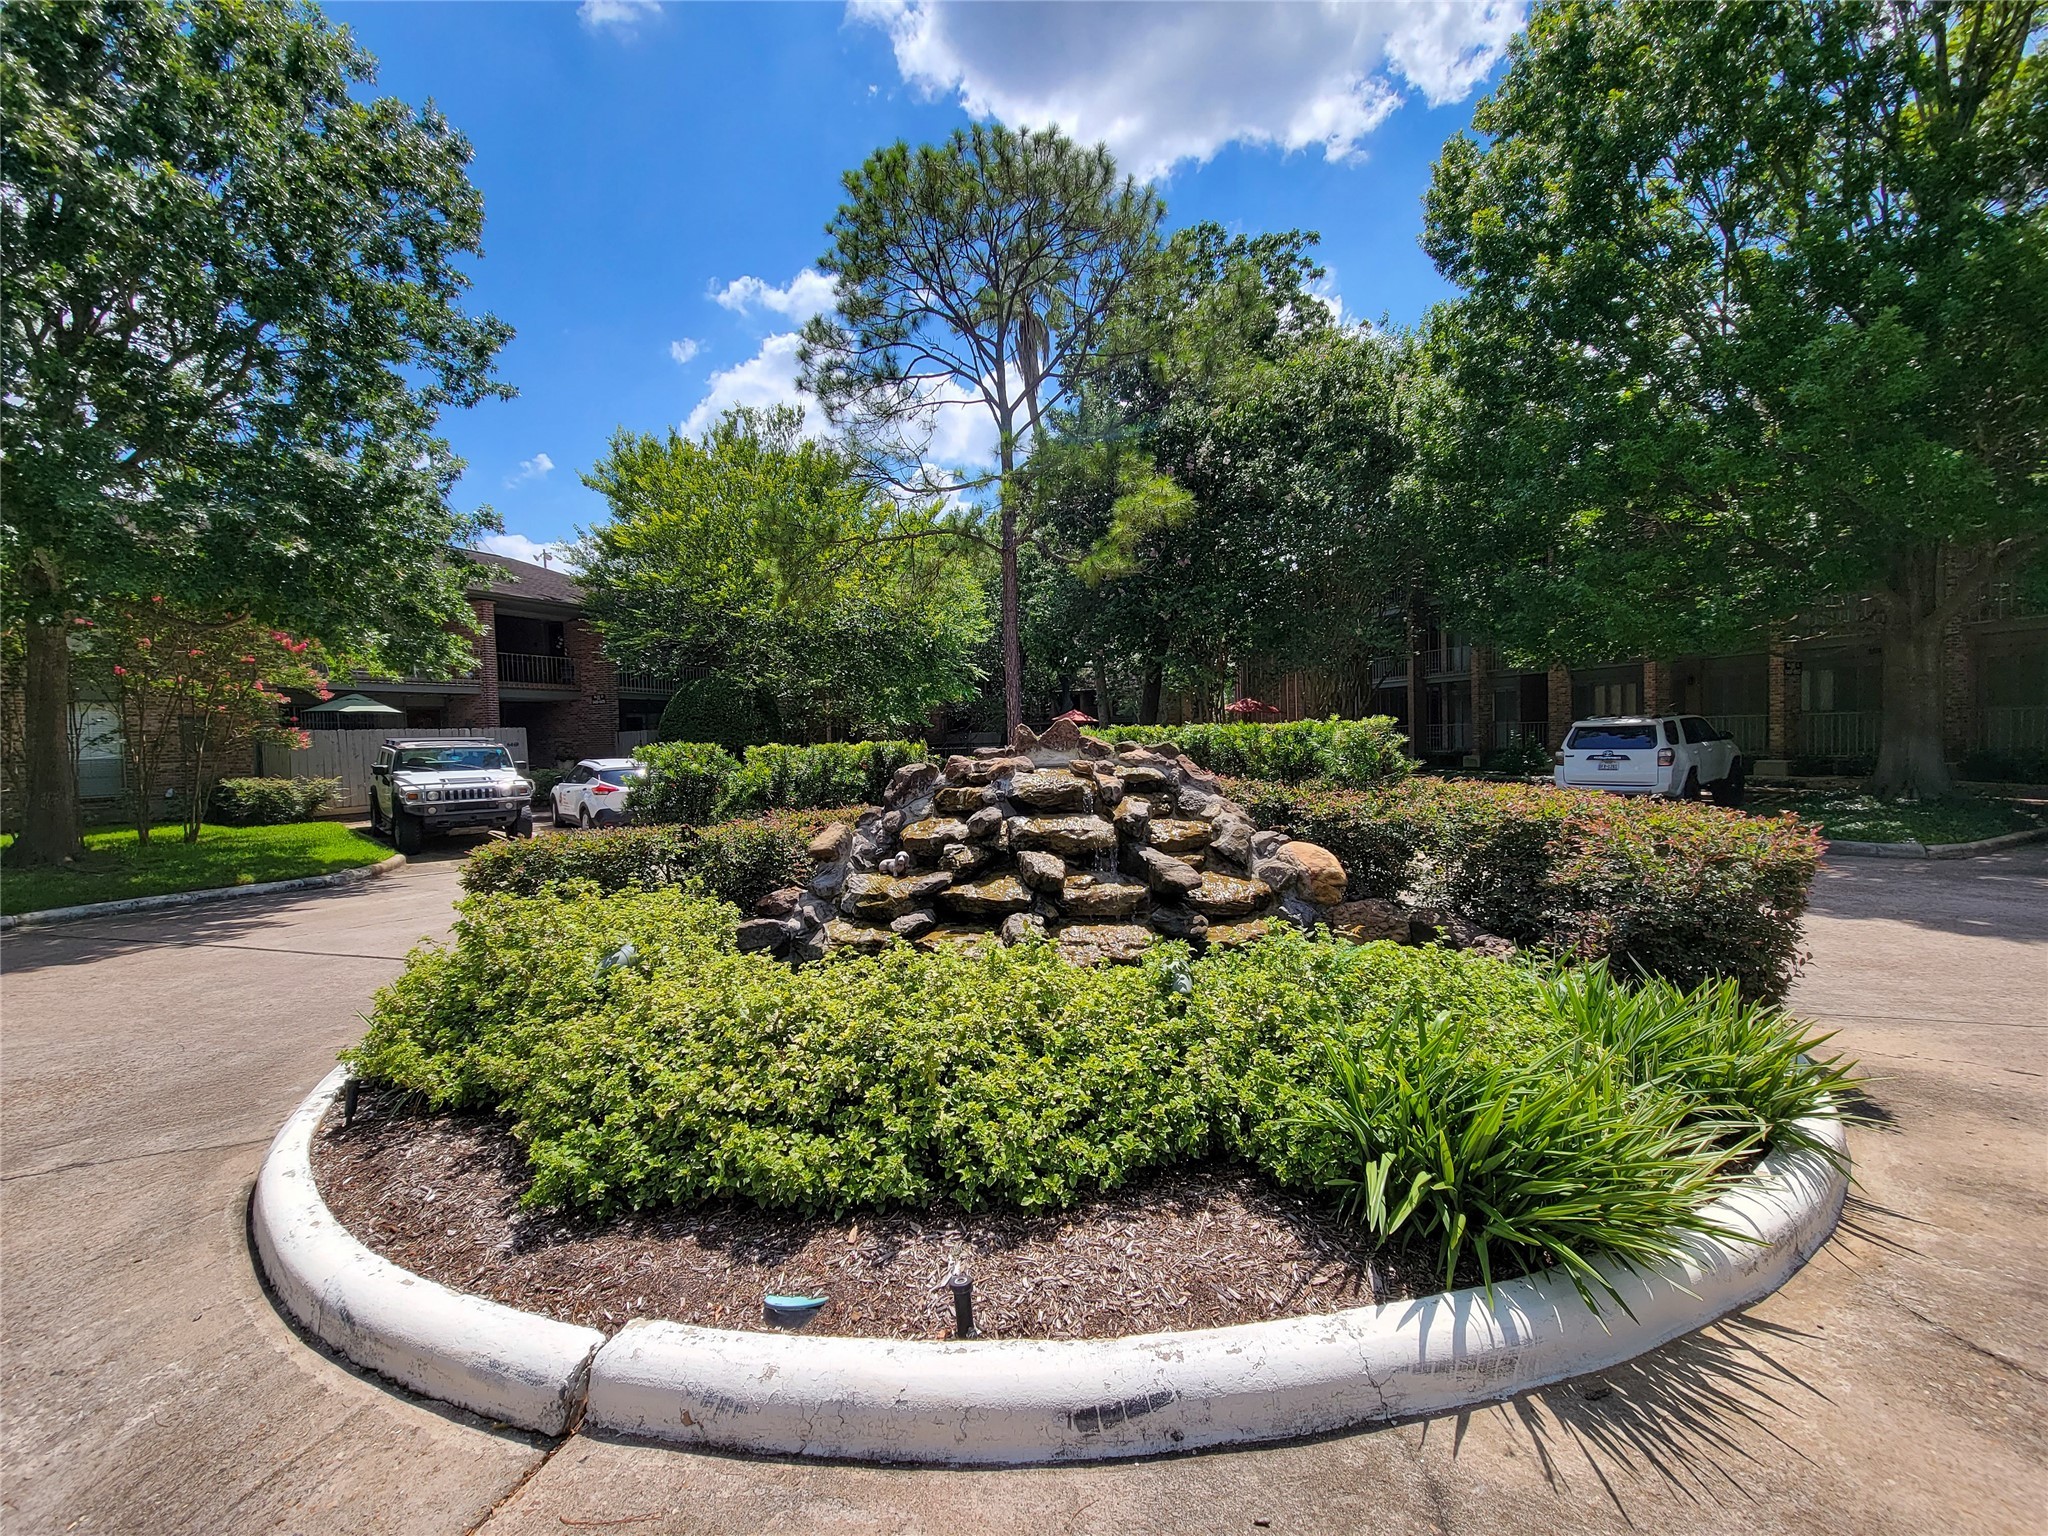 Lovely landscaping touches like this fountain in a roundabout just in front of the building. There is quite ample visitor parking near the unit.